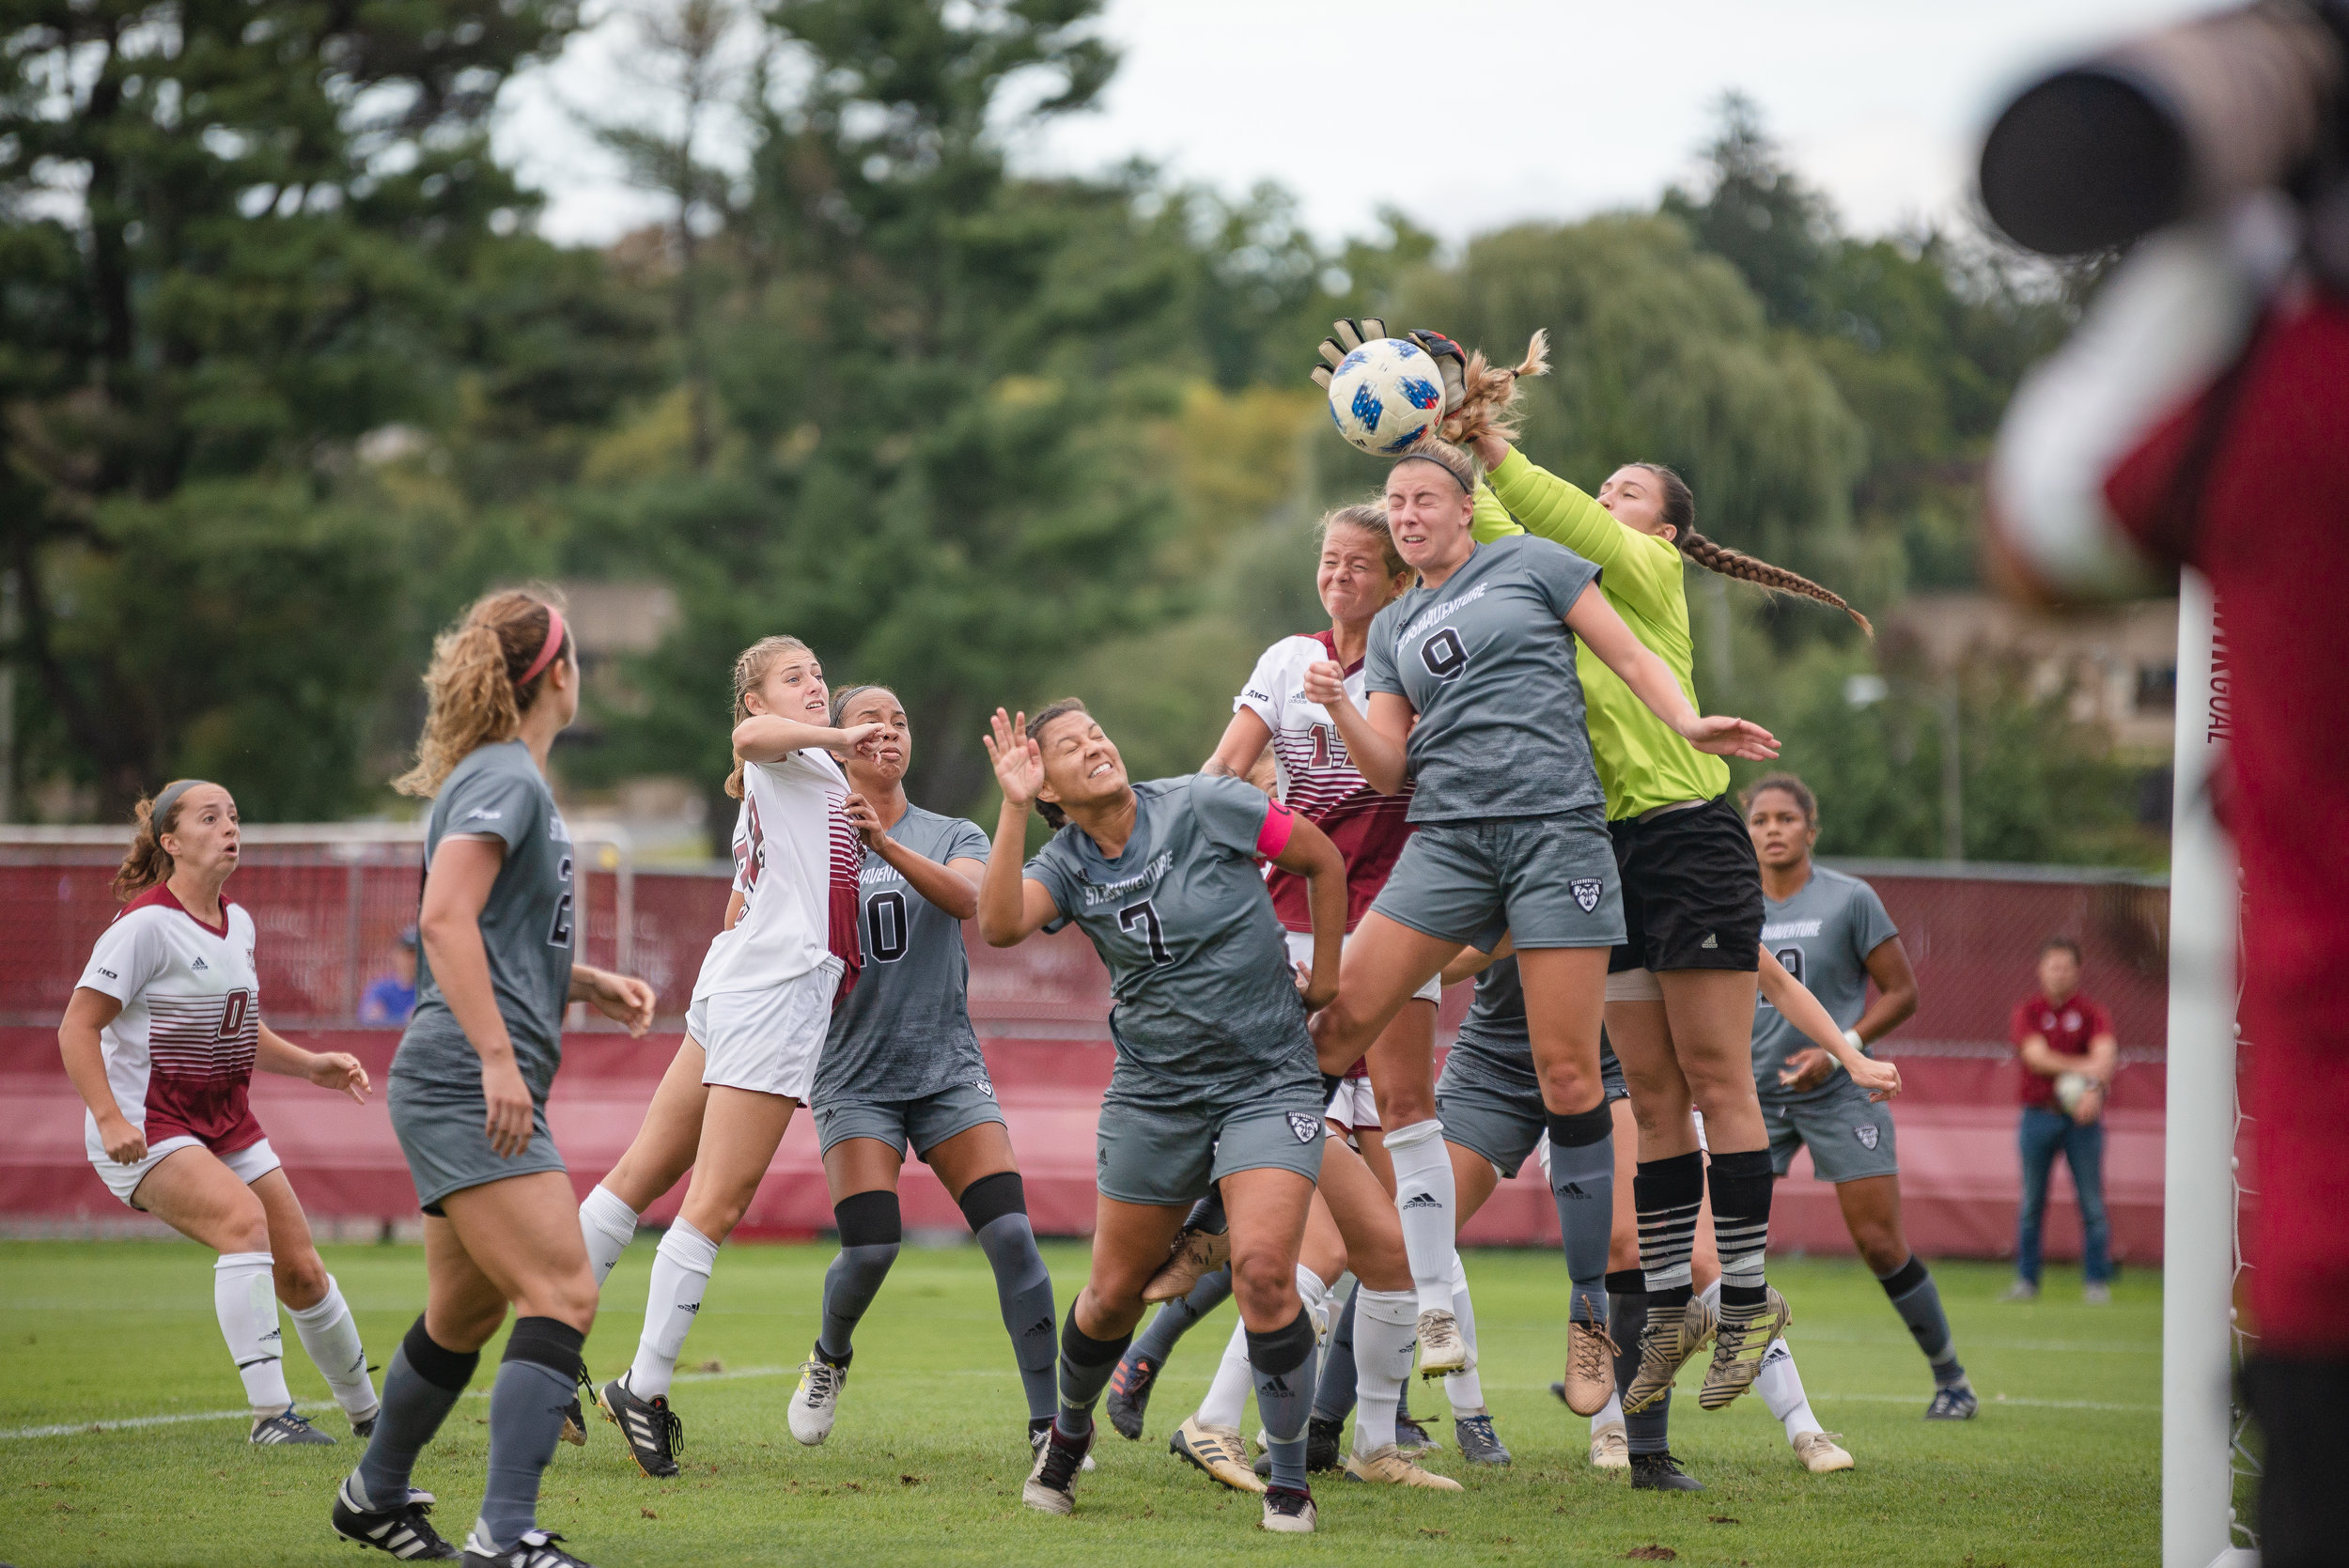  The Minutewomen held off St. Bonaventure at home on Thursday, Sept. 27, 2018, winning 1-0 in Amherst.  (Photo by Judith Gibson-Okunieff) 